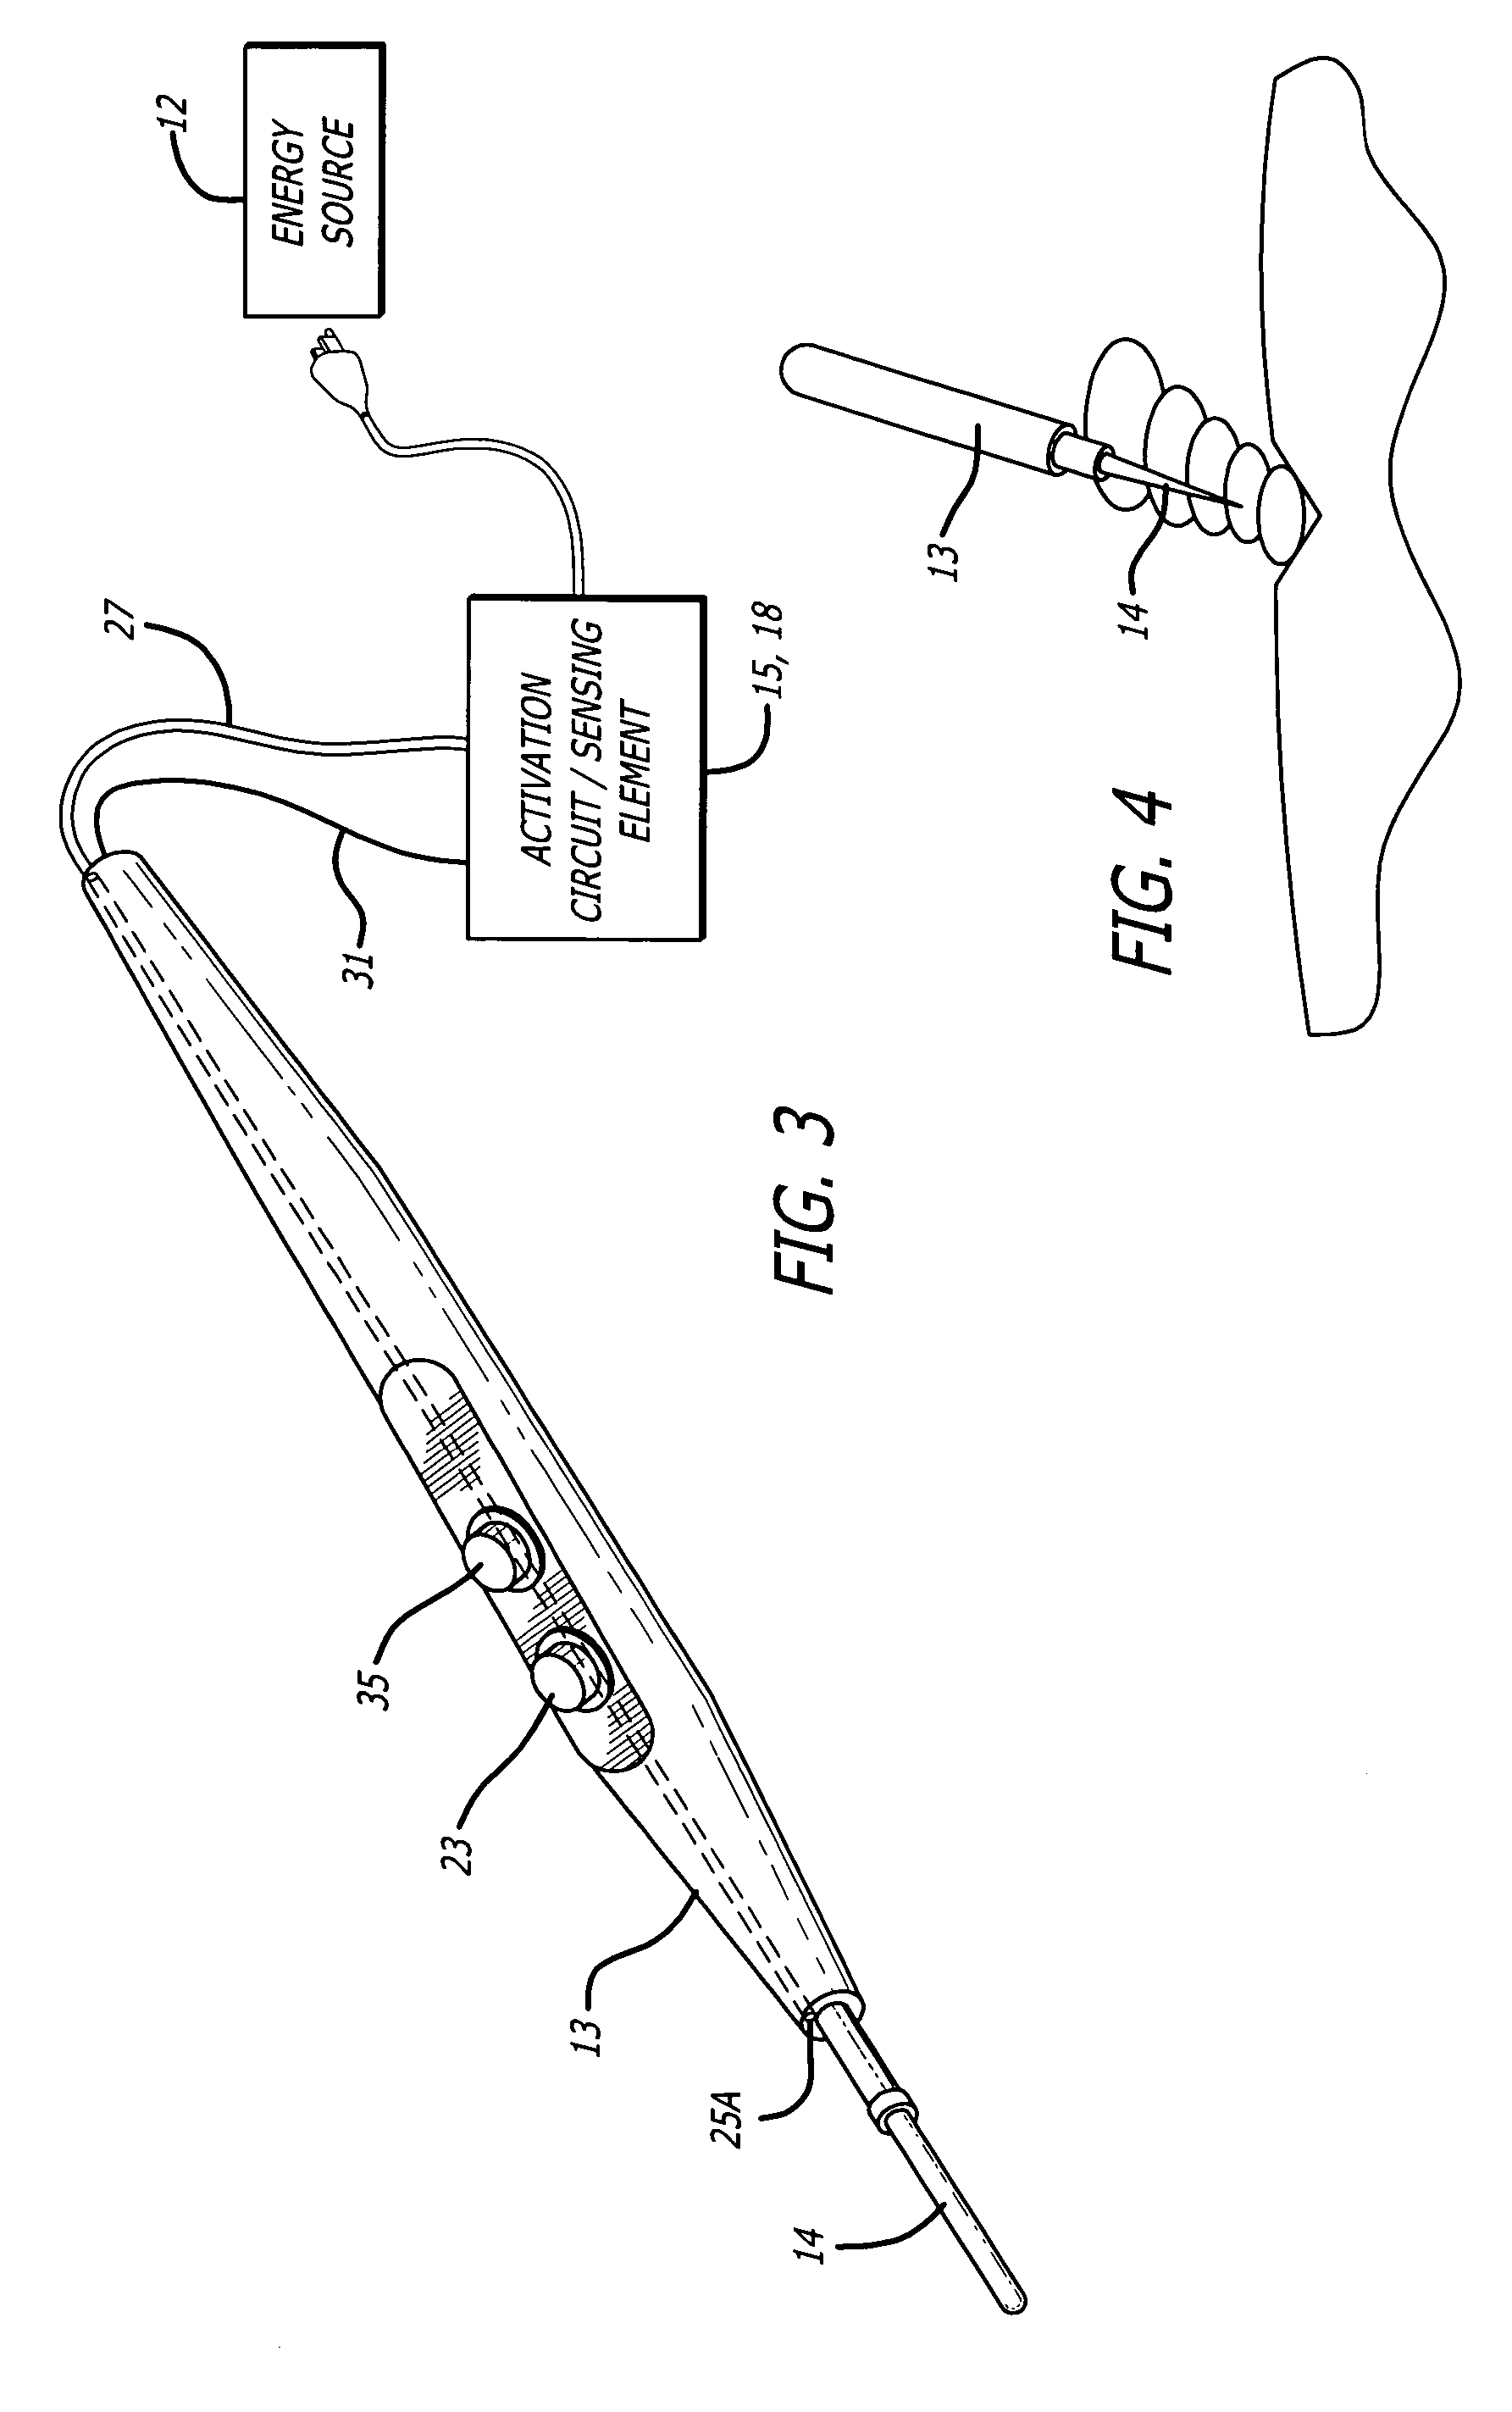 Oxygen sensing during a surgical procedure